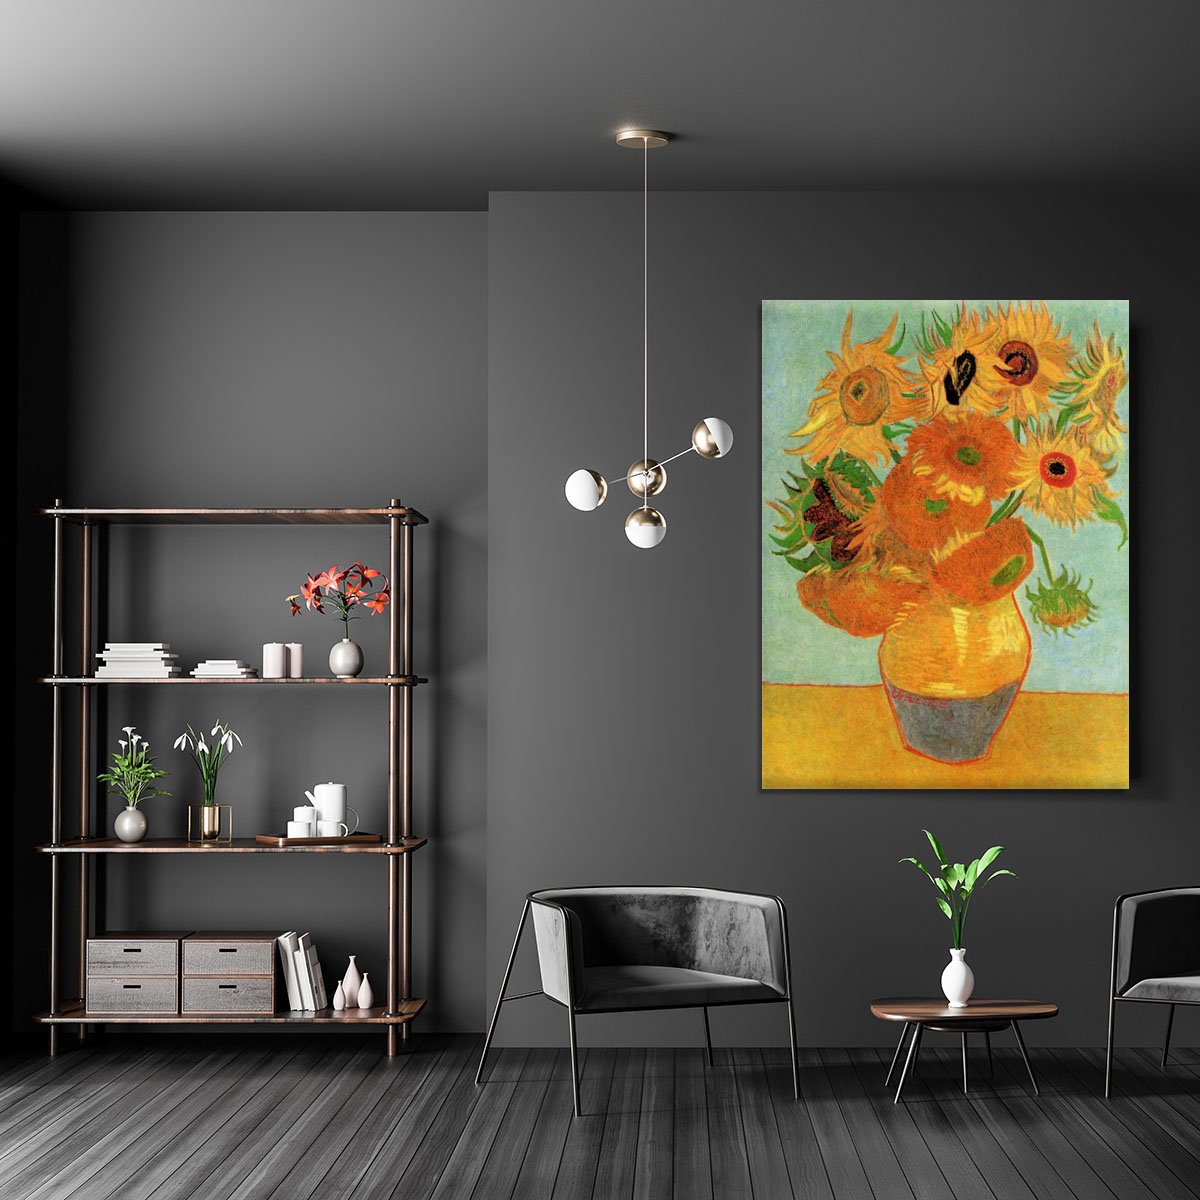 Still Life Vase with Twelve Sunflowers by Van Gogh Canvas Print or Poster